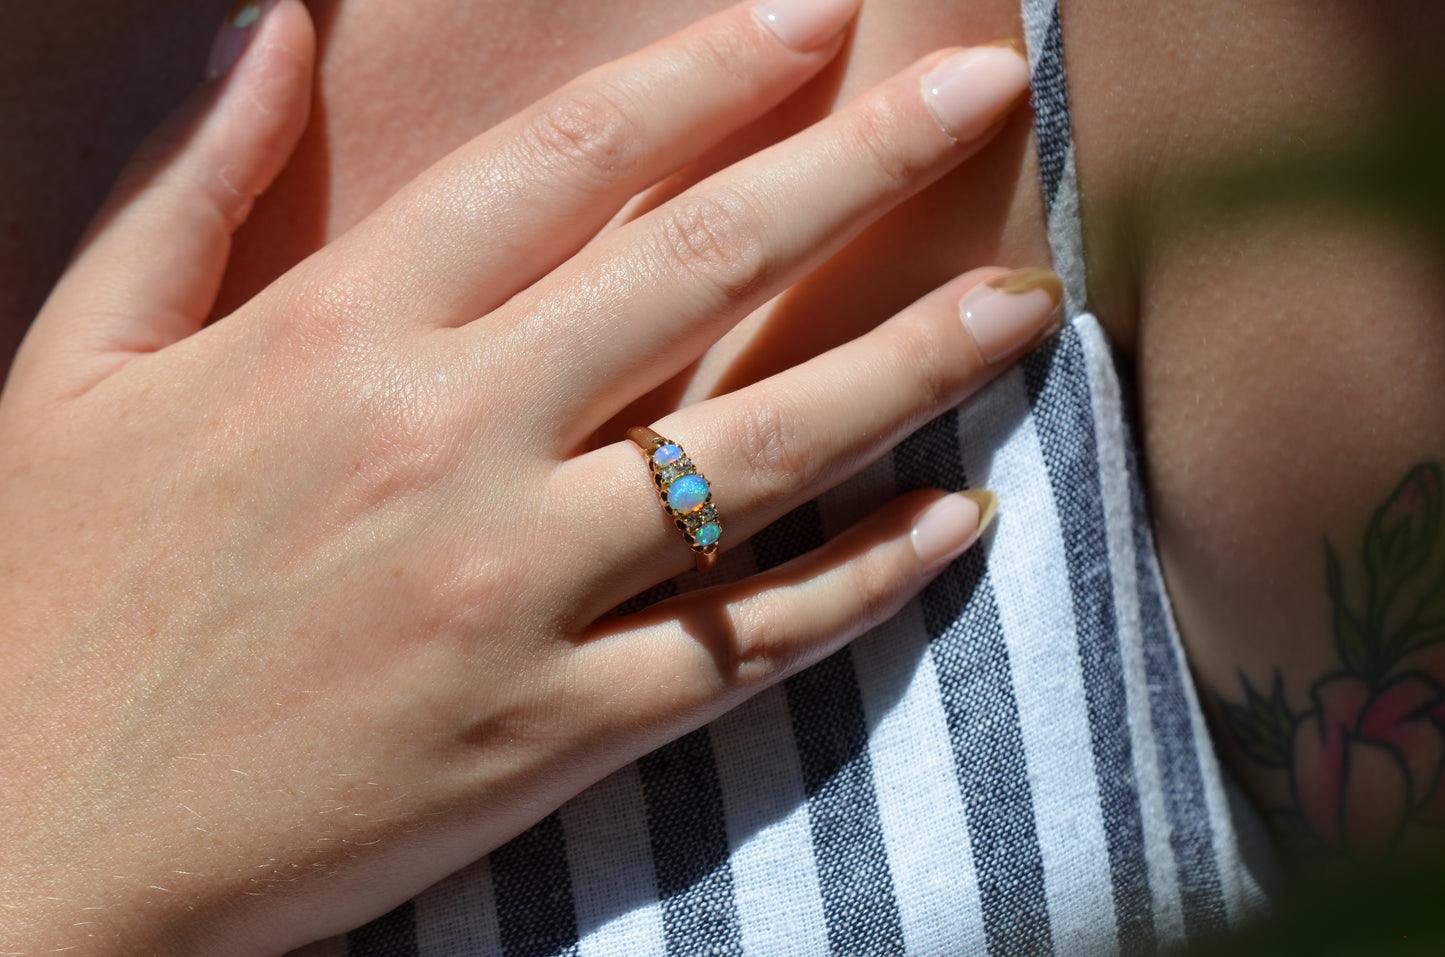 A medium-close image of the ring on a Caucasian model, showing the scale to the ring on the hand as well as the play of color of the opals in direct sunlight. While the most prominent colors are blue with green and violet, a flame of orange is visible to one side. The model's hand is resting on her own chest; also visible are long pink and gold nails and the edge of a floral arm tattoo.